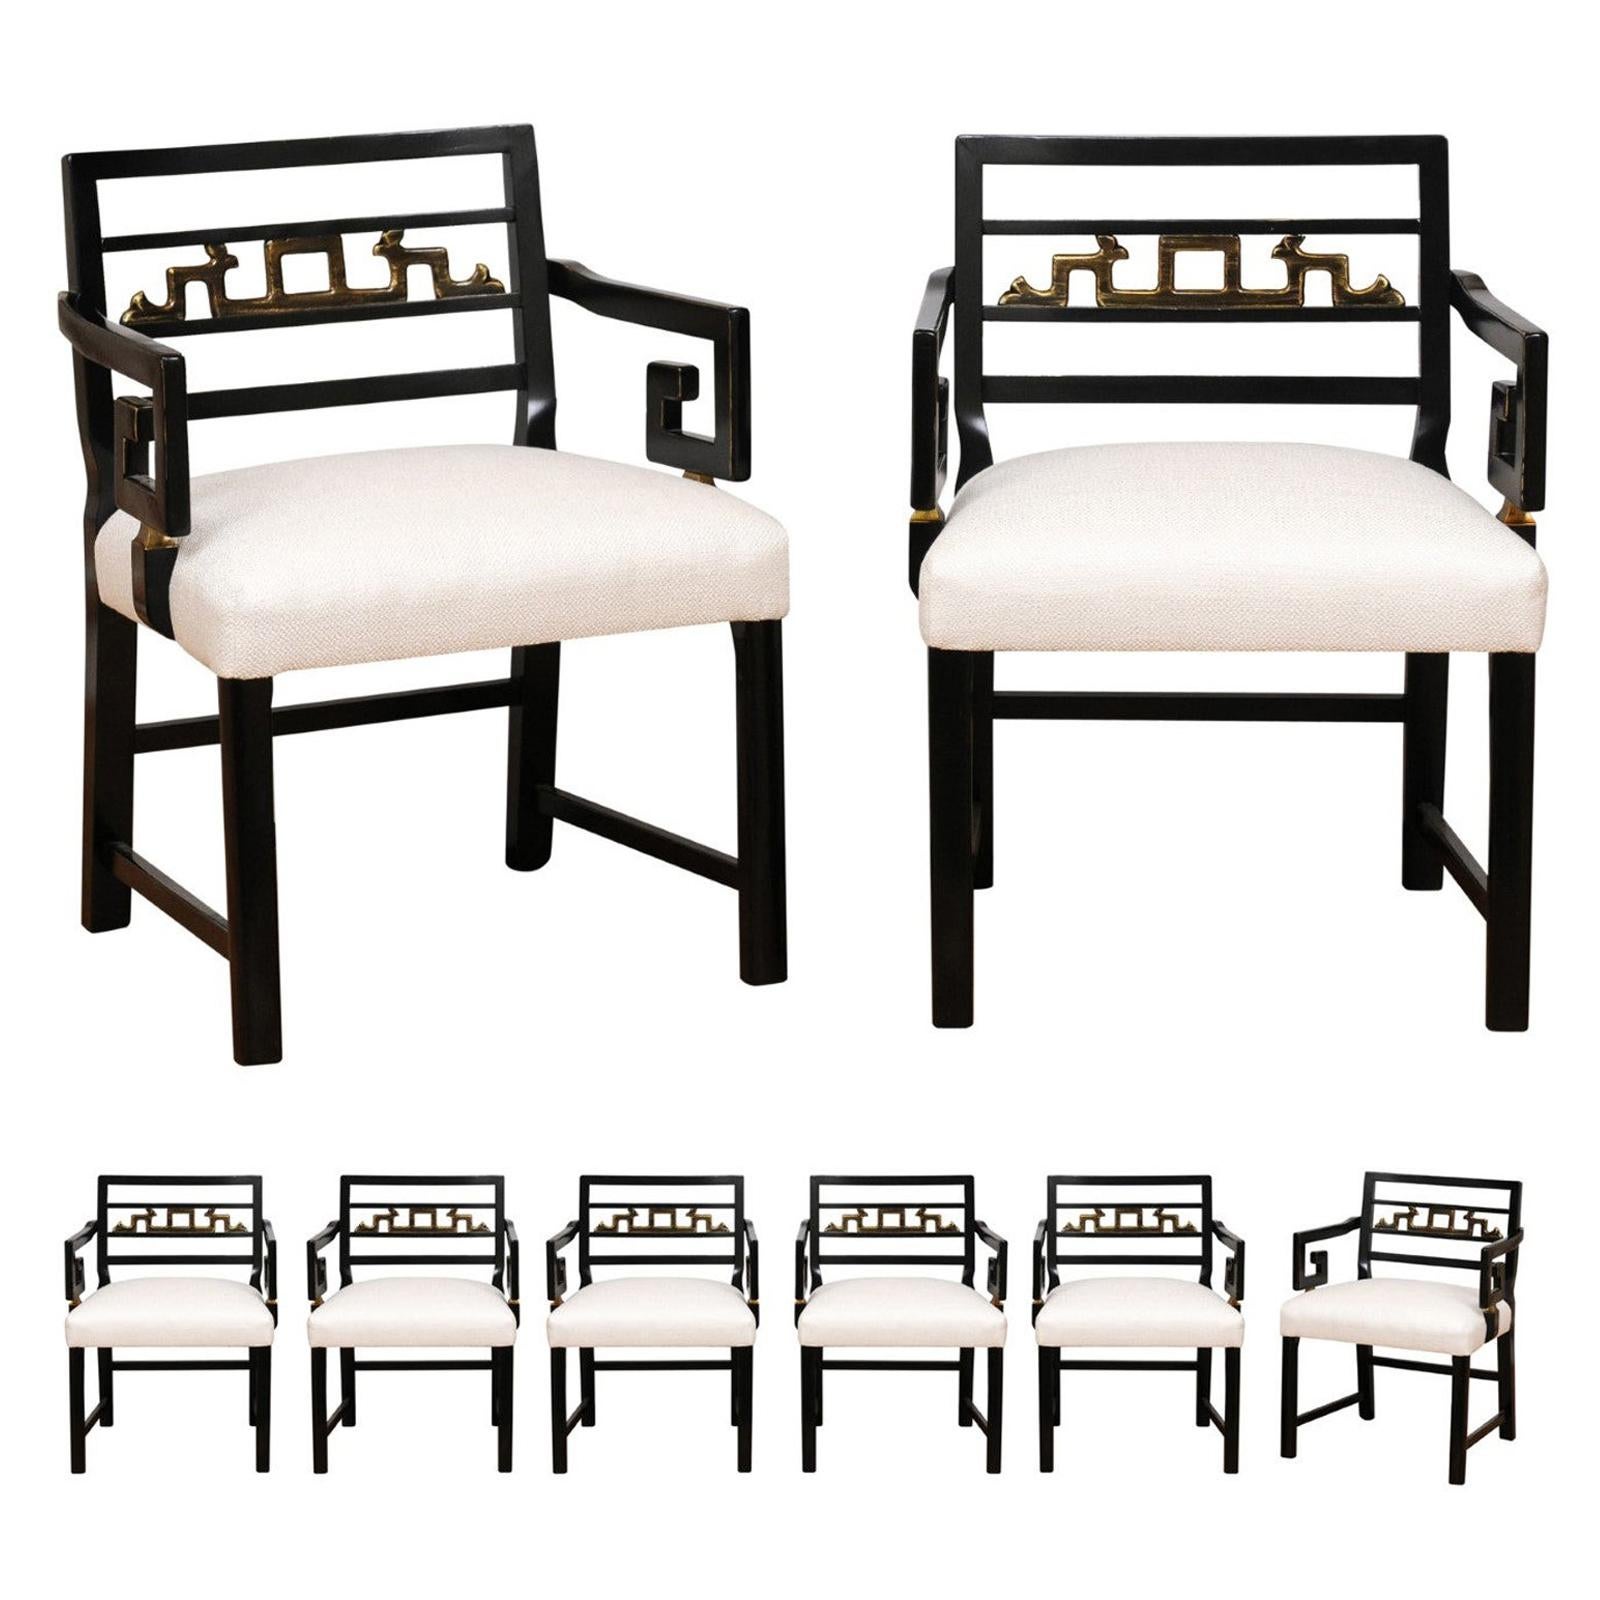 Exquisite Set of 8 Chinoiserie Greek Key Armchairs by Baker, circa 1960